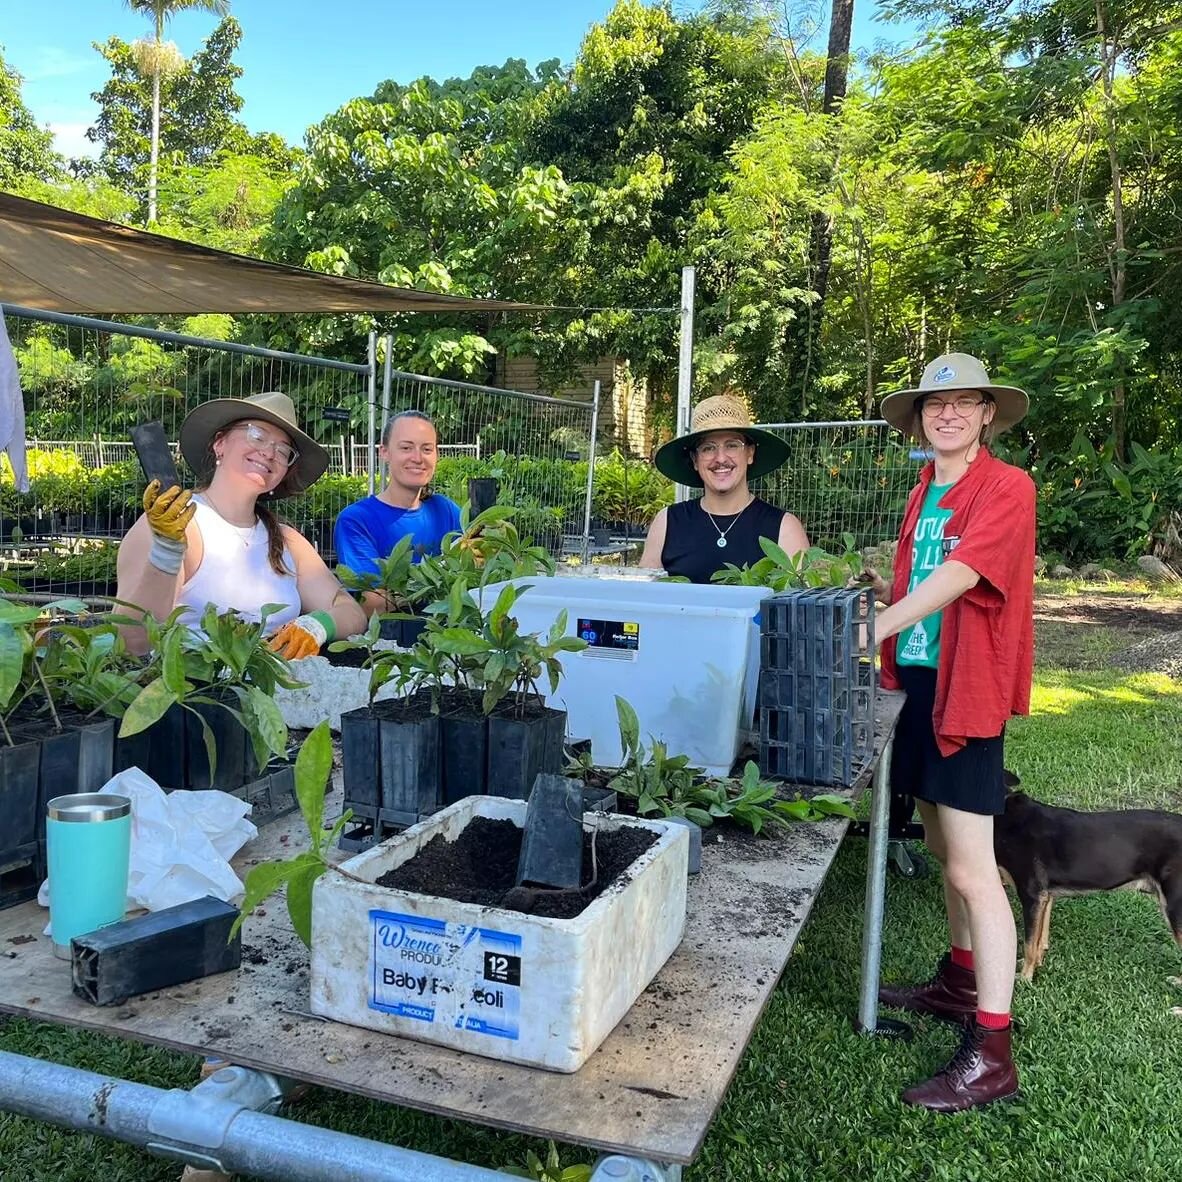 Meet some of our lovely volunteers from yesterday's planting session ~ from the left we have the wonderful Eve, Rachel, Sean and Keziah potting up some Barringtonia calyptrata seedlings. It was a beauty of a morning followed by an impromptu bbq by Ru